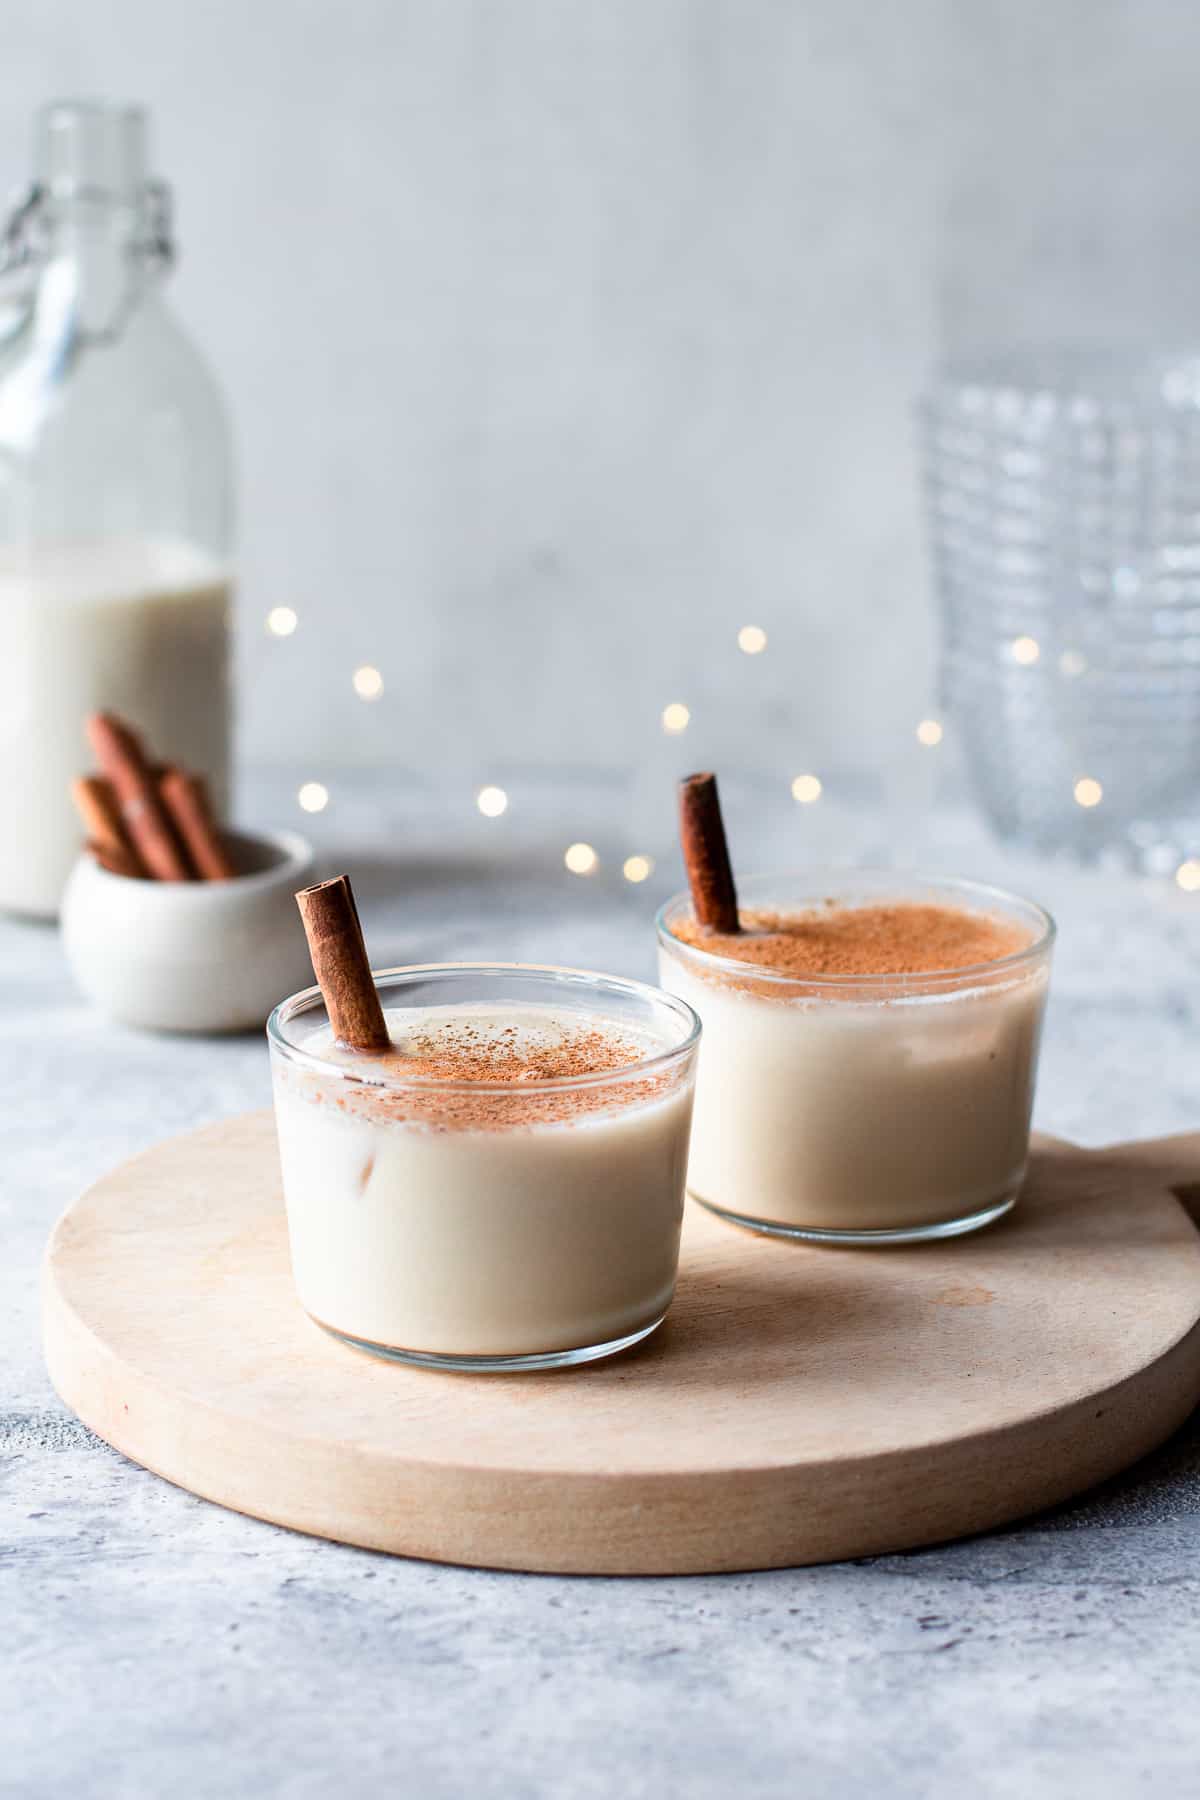 Two coconut milk cocktails with a cinnamon stick in it on a wooden board. Christmas lights in the background.